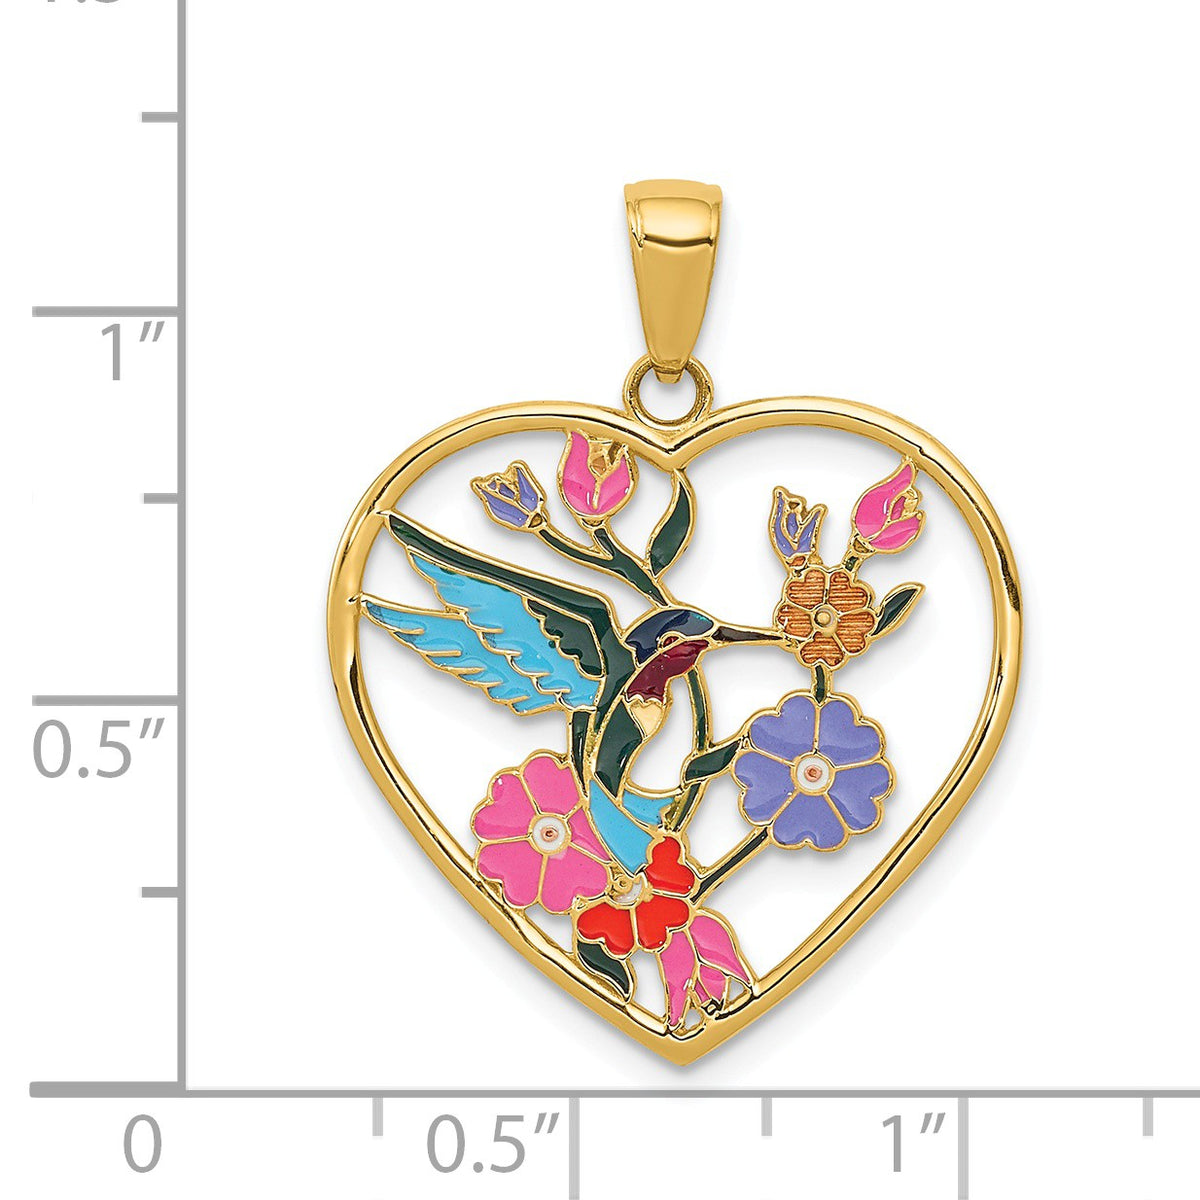 Alternate view of the 14k Yellow Gold 22mm Enameled Hummingbird Heart Pendant by The Black Bow Jewelry Co.